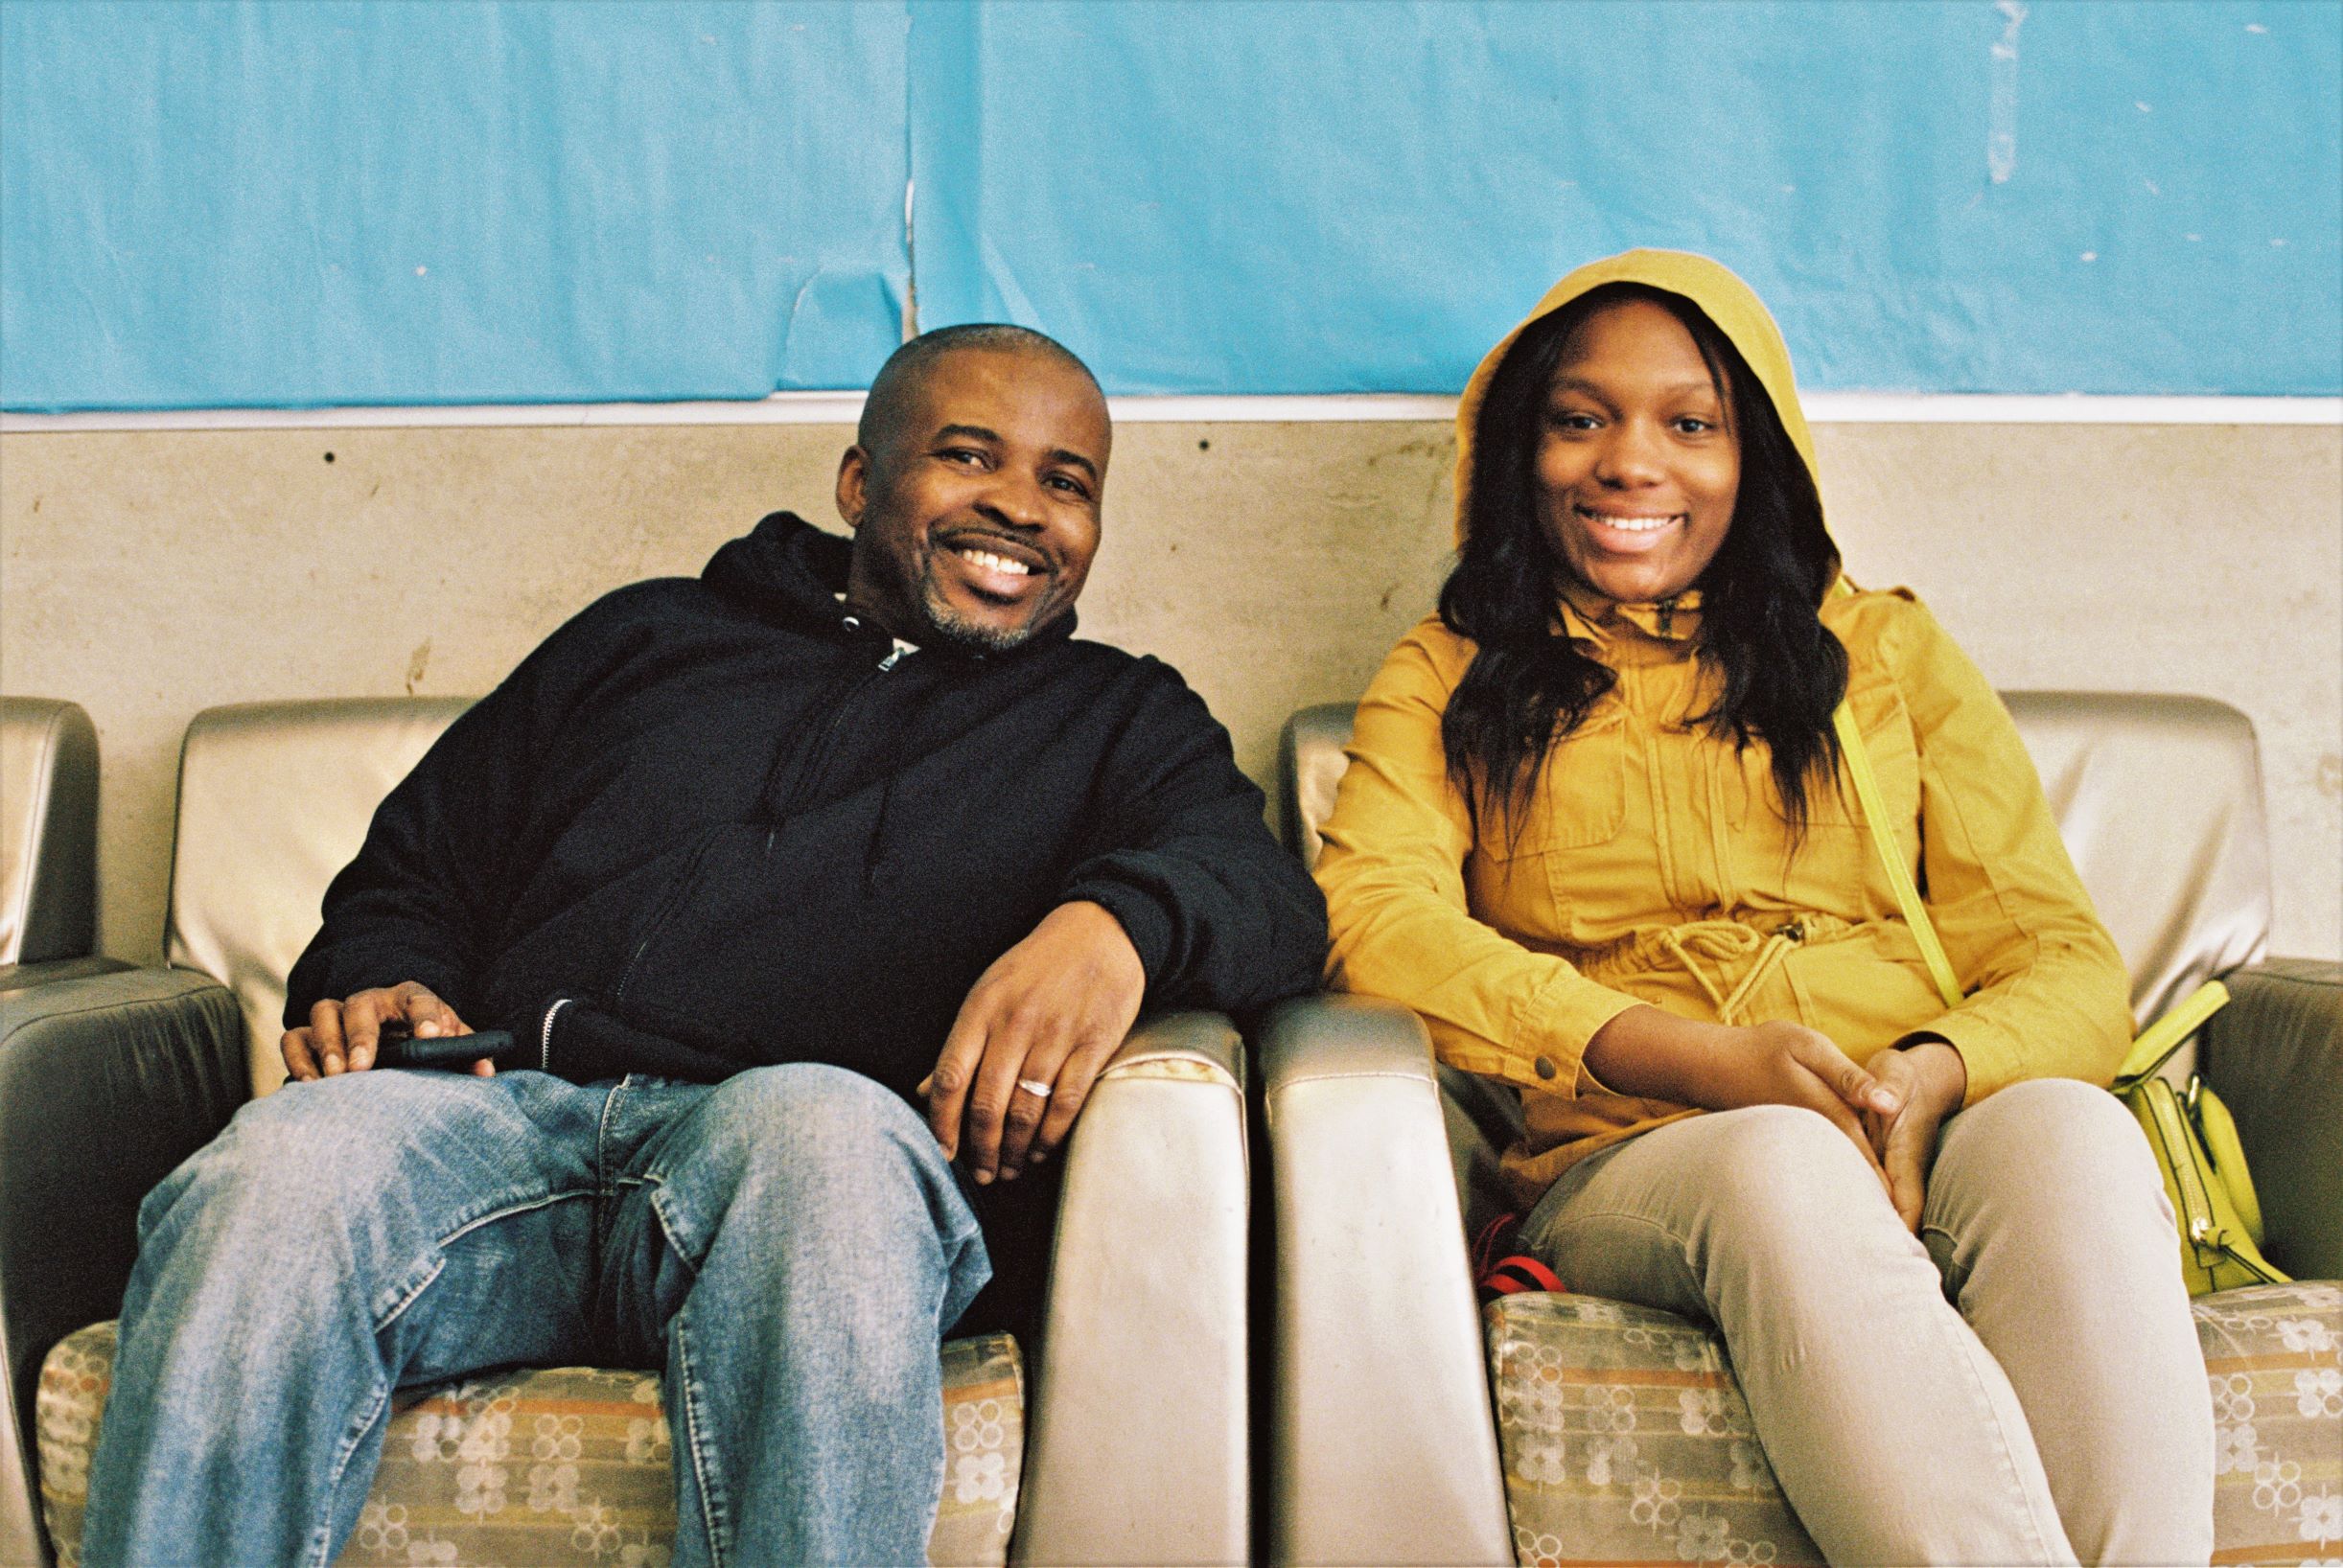 Image: George Wilson and a young woman, a client at BBF Family Services, smiling into camera and sitting on a beige couch at BBF. Photo by Eric K. Roberts.